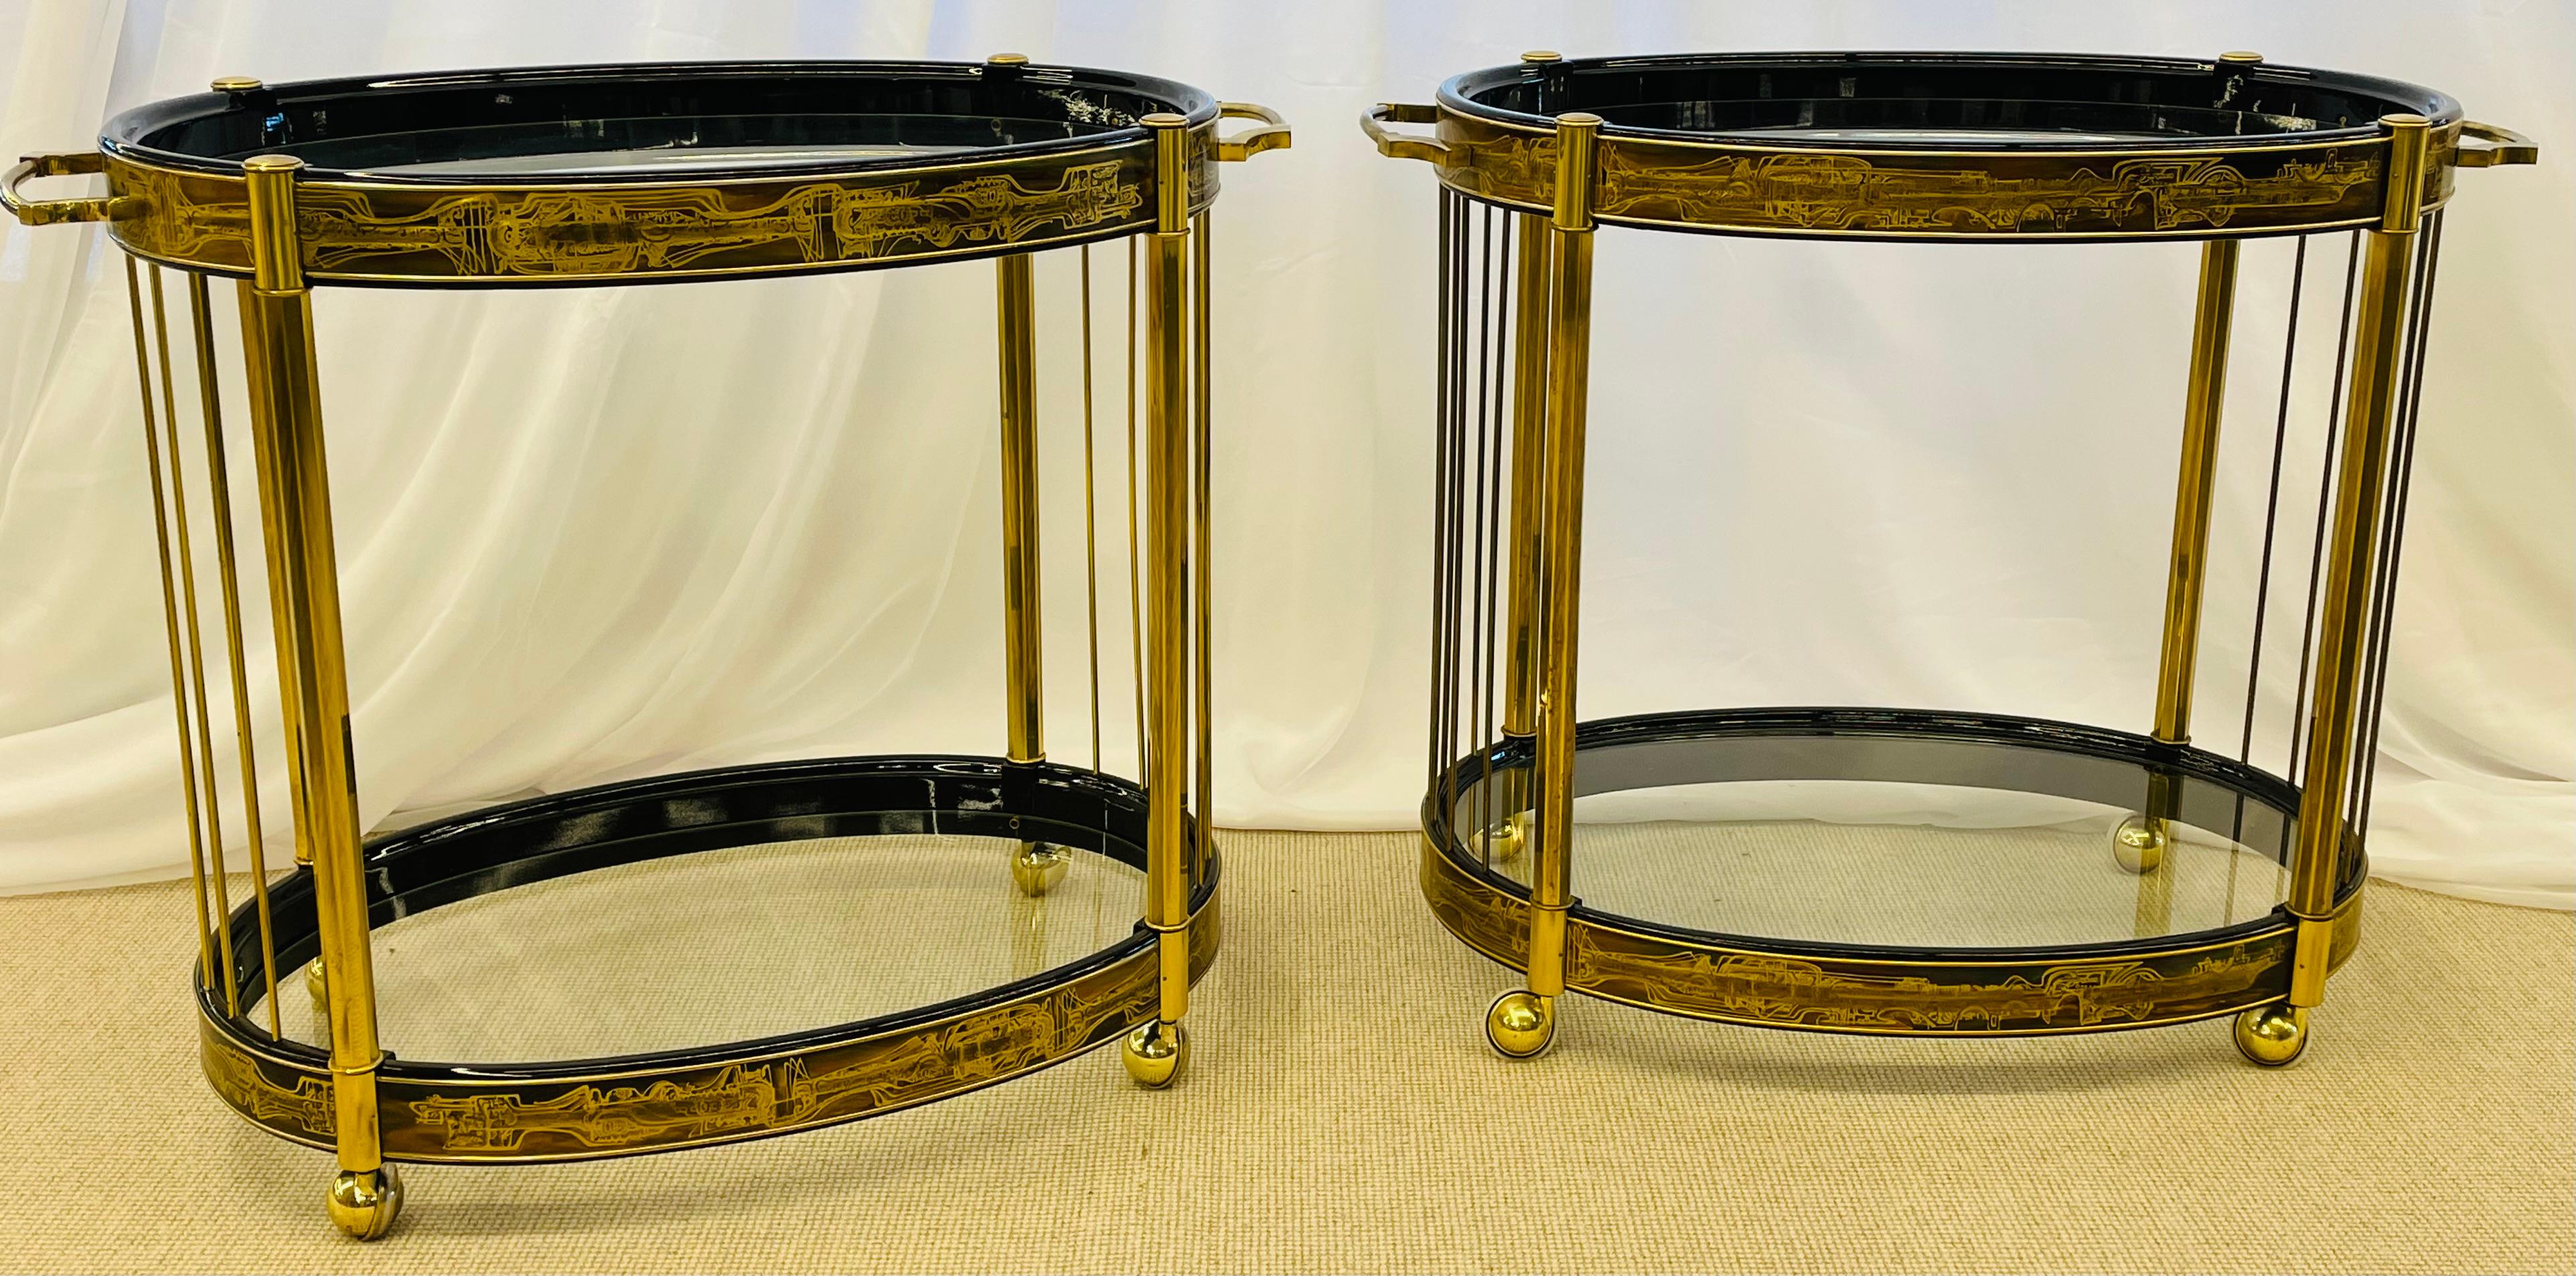 Mastercraft, Mid-Century Modern Serving Wagons, Gold Brass, Black Lacquer, 1960s For Sale 6